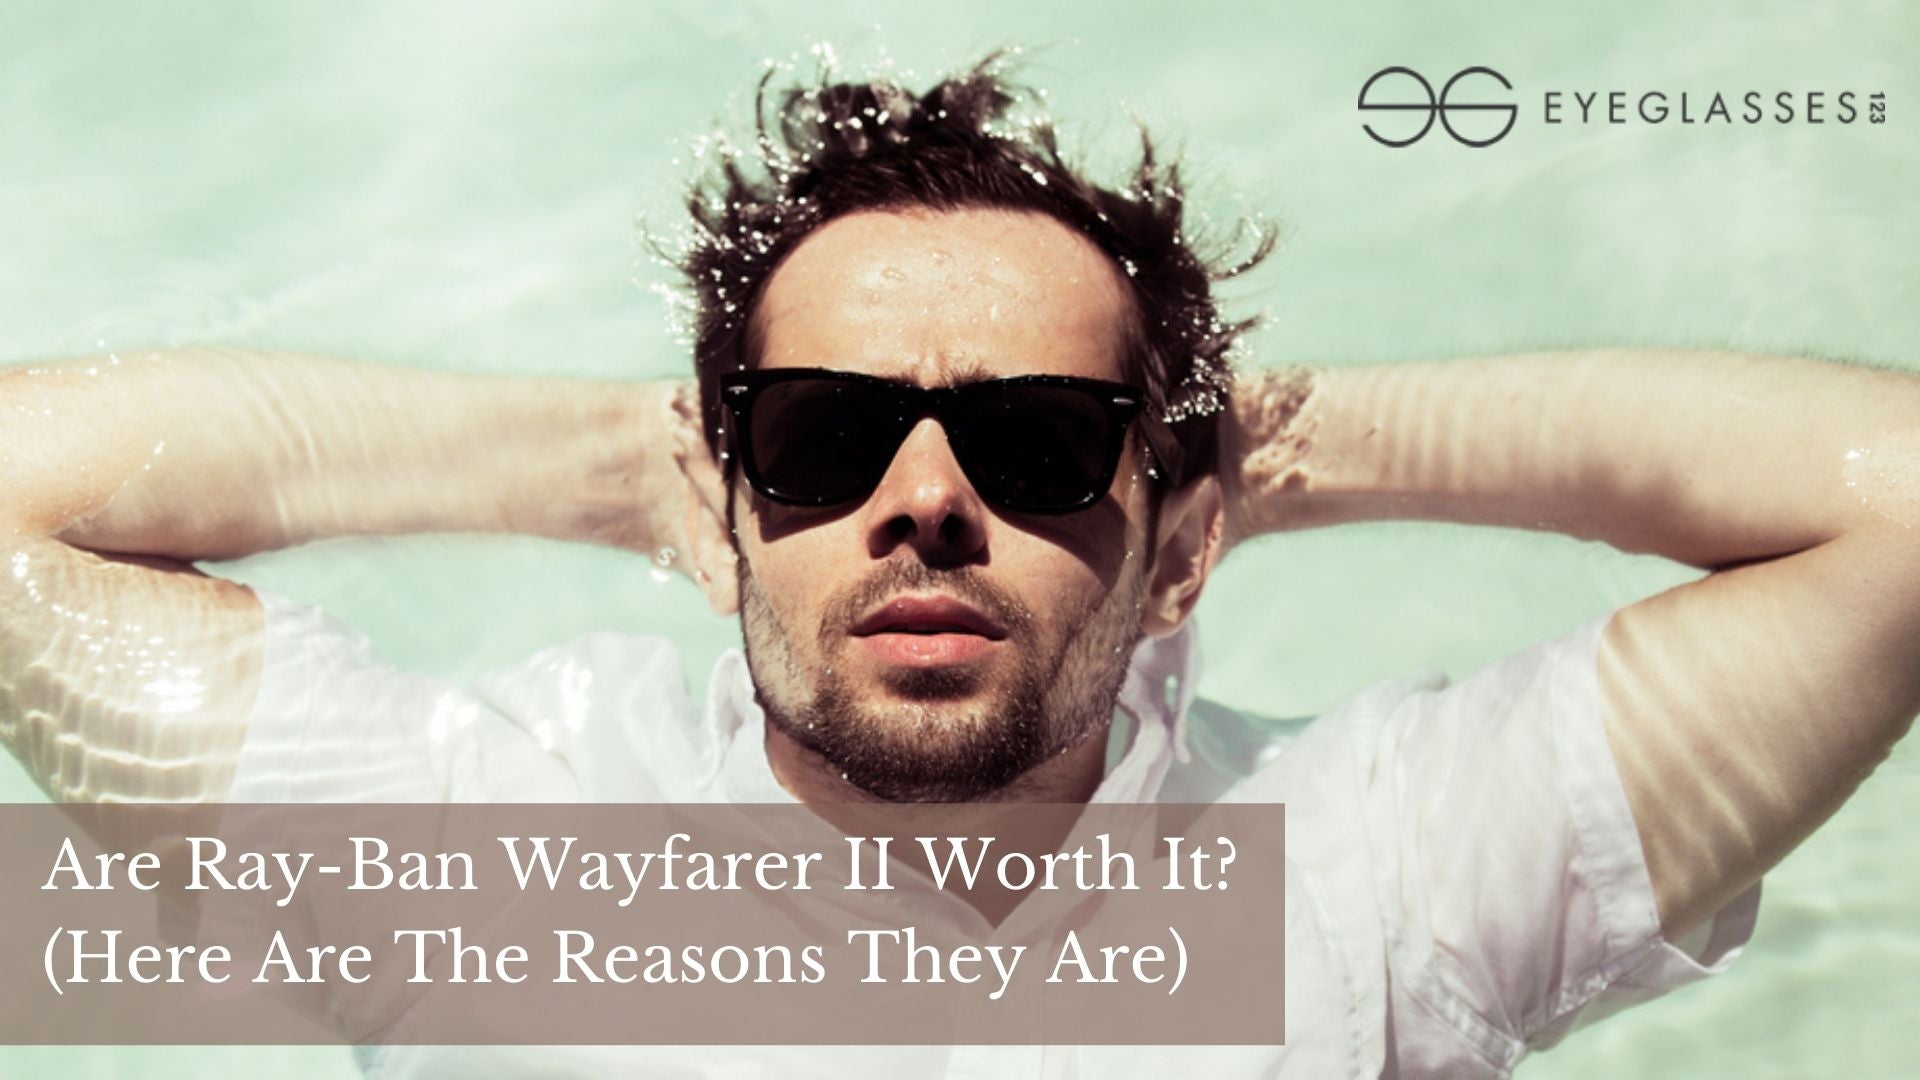 Are Ray-Ban Wayfarer II Worth It? (Here Are The Reasons They Are)